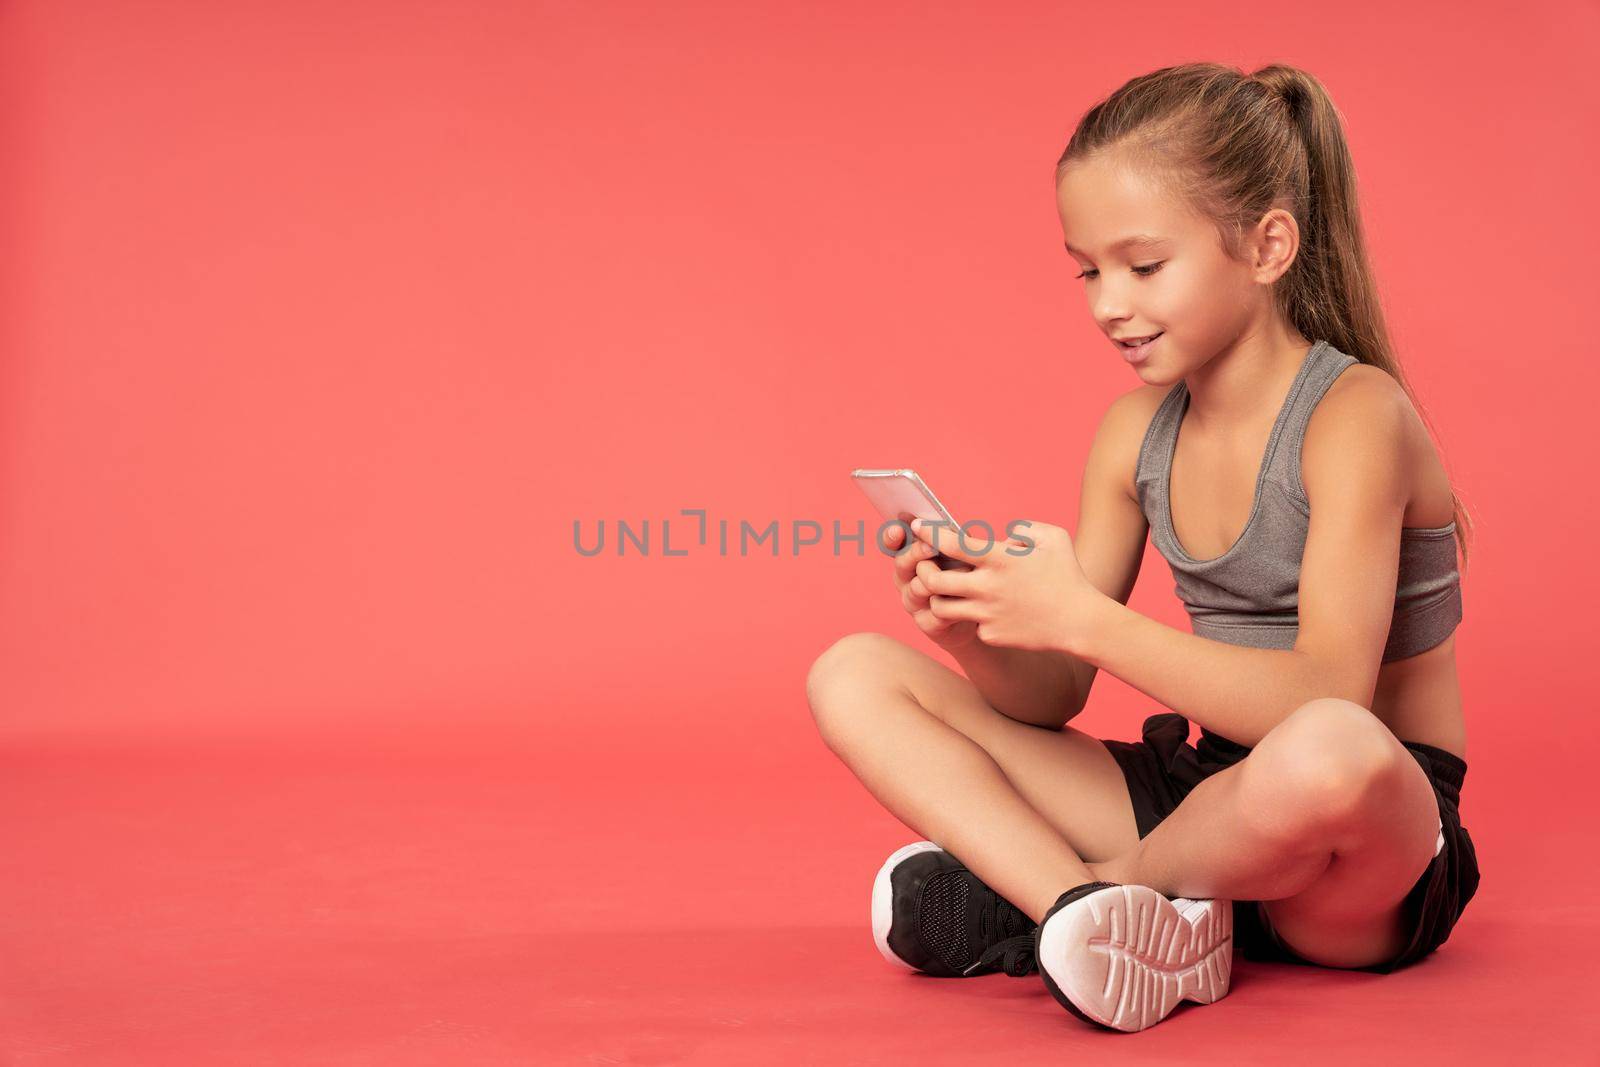 Adorable girl using cellphone against red background by friendsstock